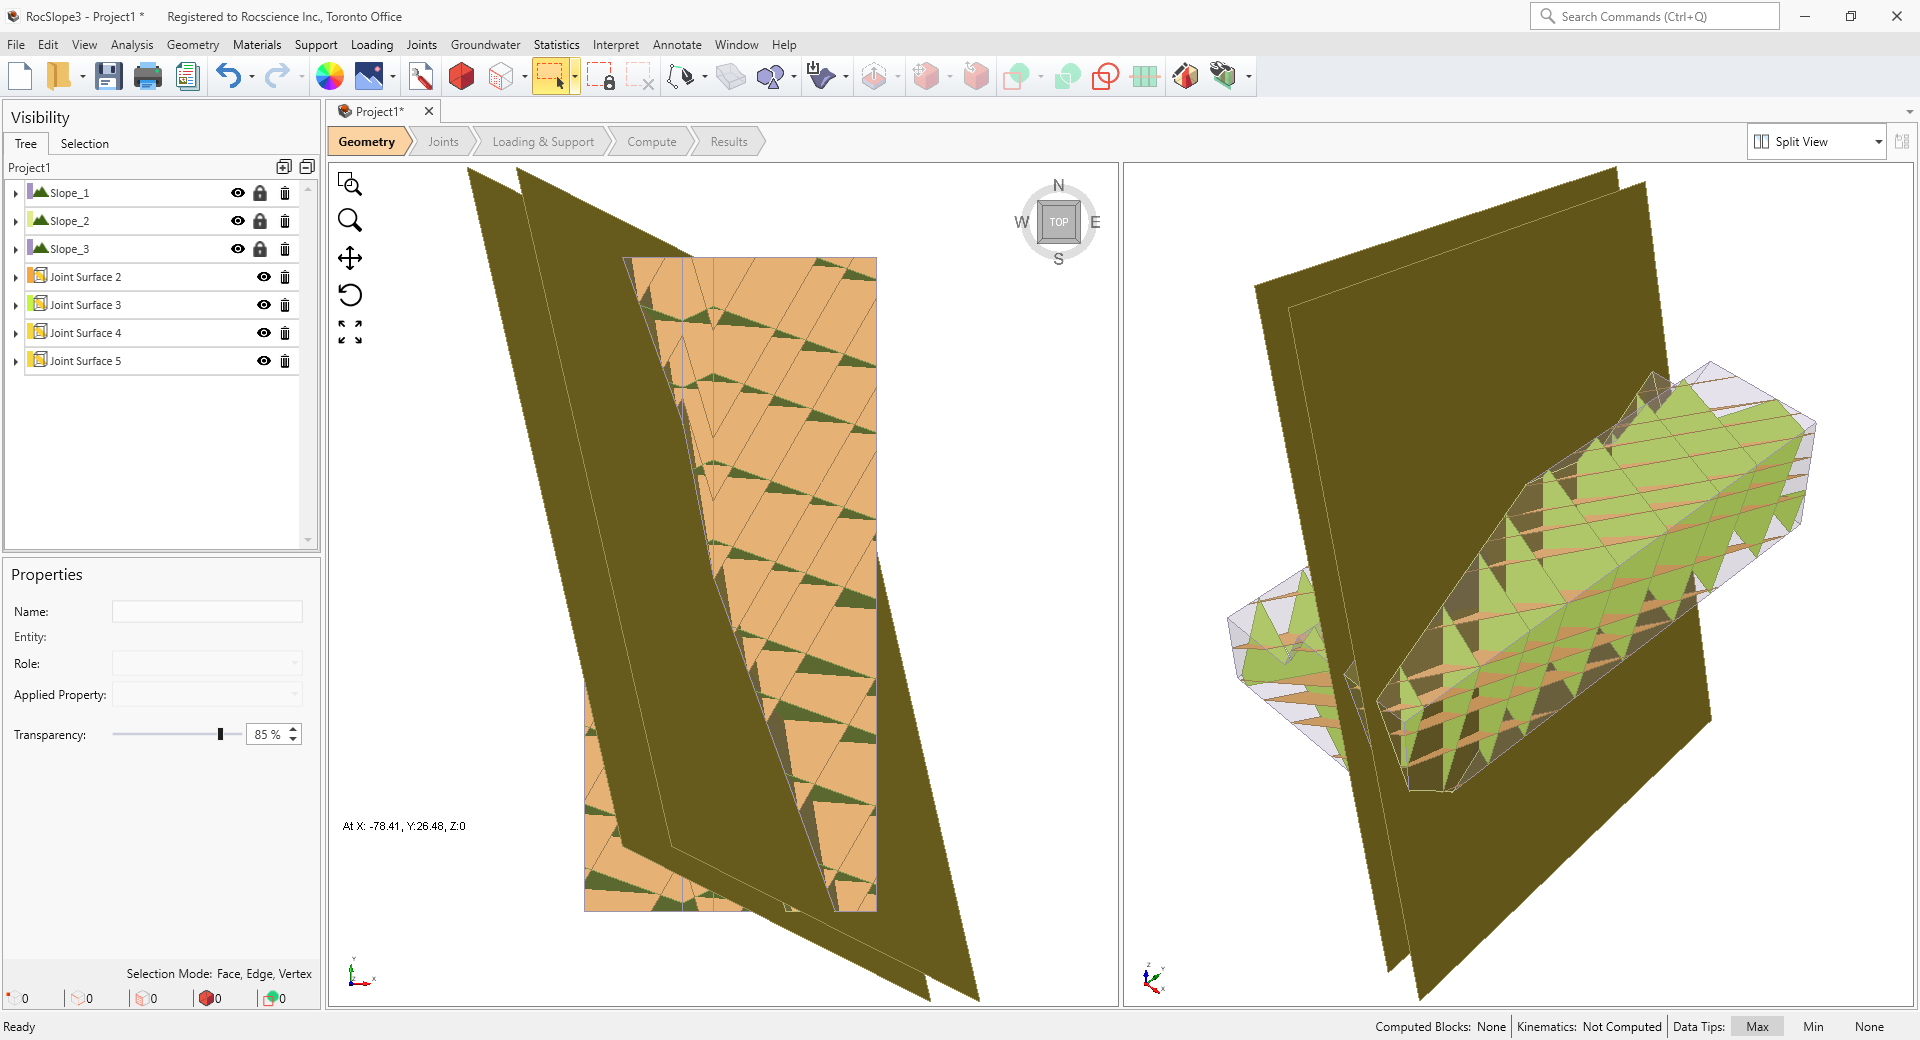 3D View showing the slope and joint surfaces